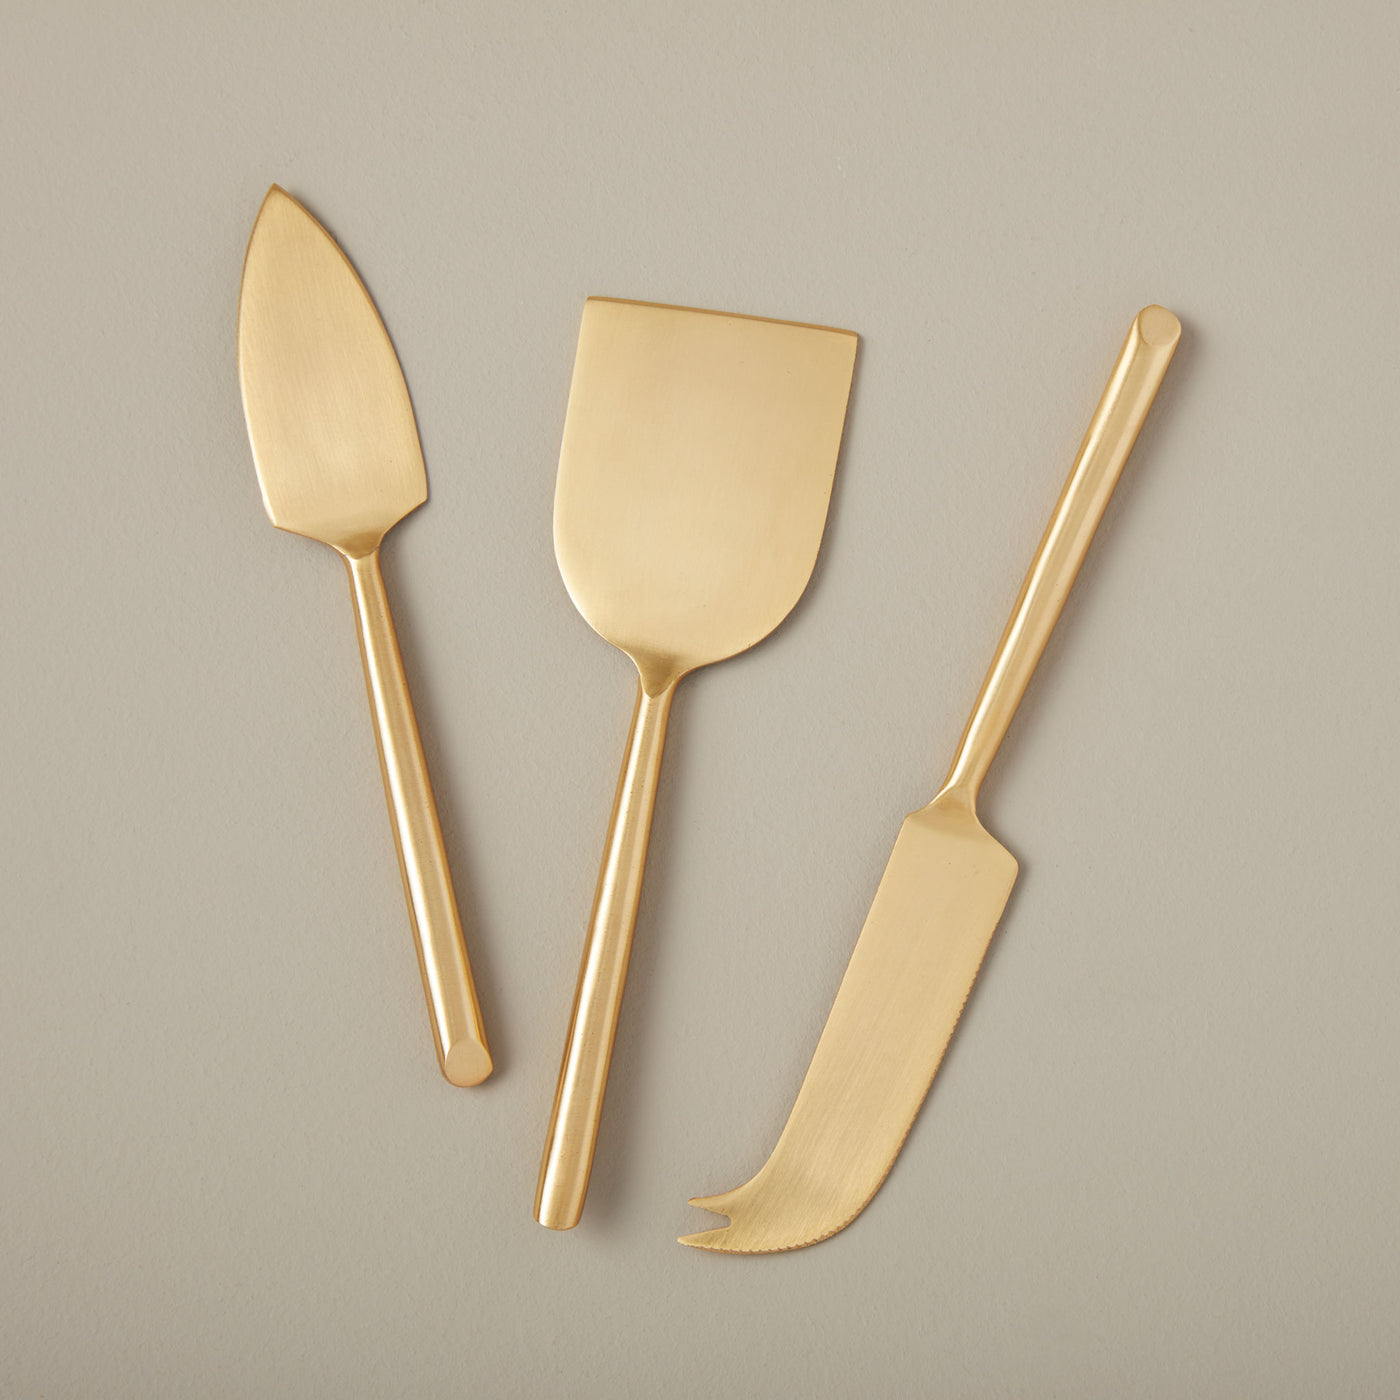 CHEESE SET OF 3 MATTE GOLD